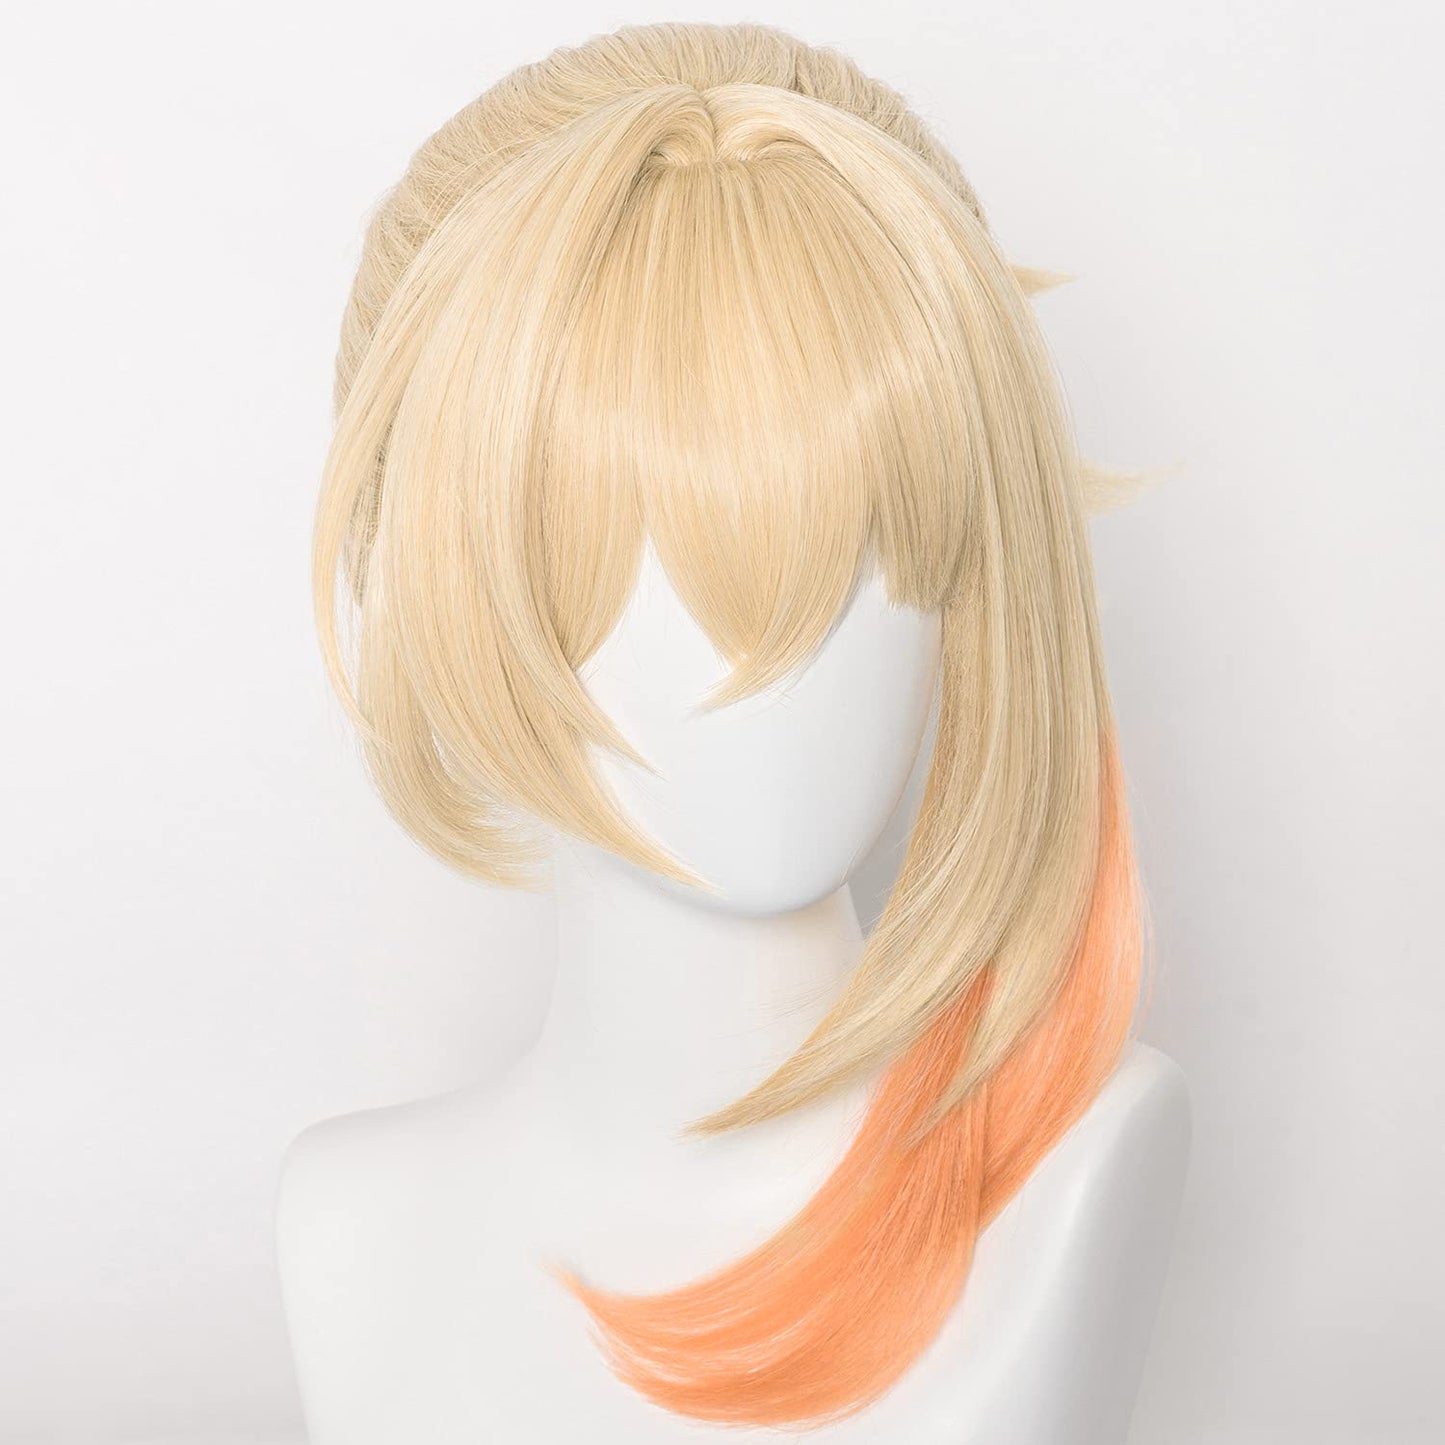 Transform into the 'Queen of the Summer Festival' with our Yoimiya Cosplay Wig!